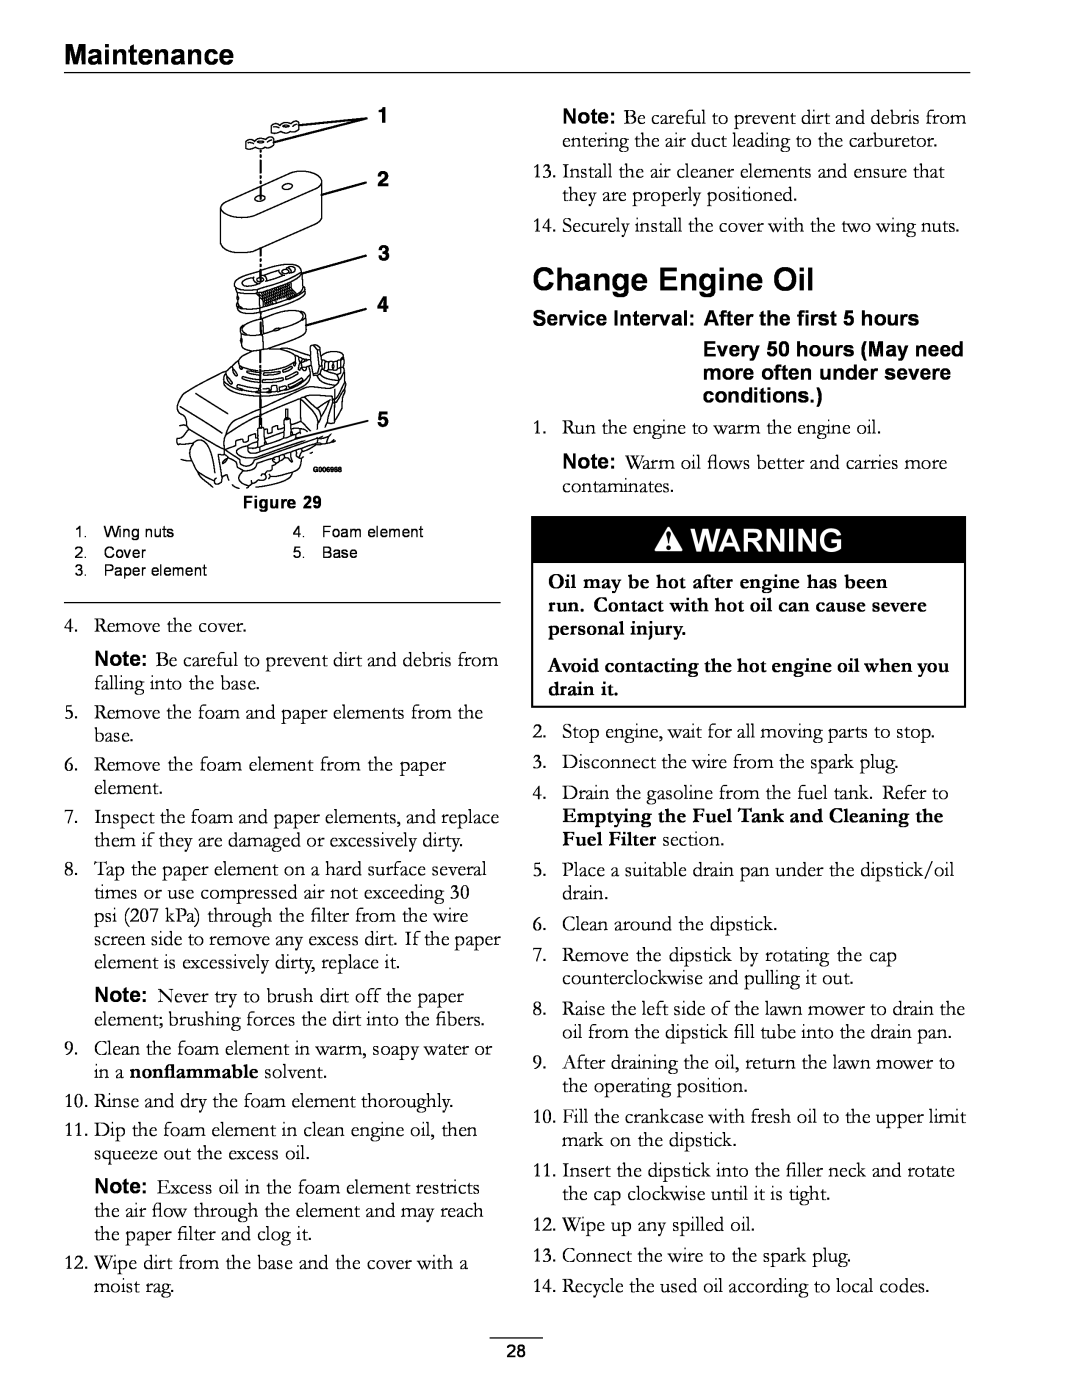 Exmark 000 & higher, 850 manual Change Engine Oil, Maintenance, Service Interval After the first 5 hours 